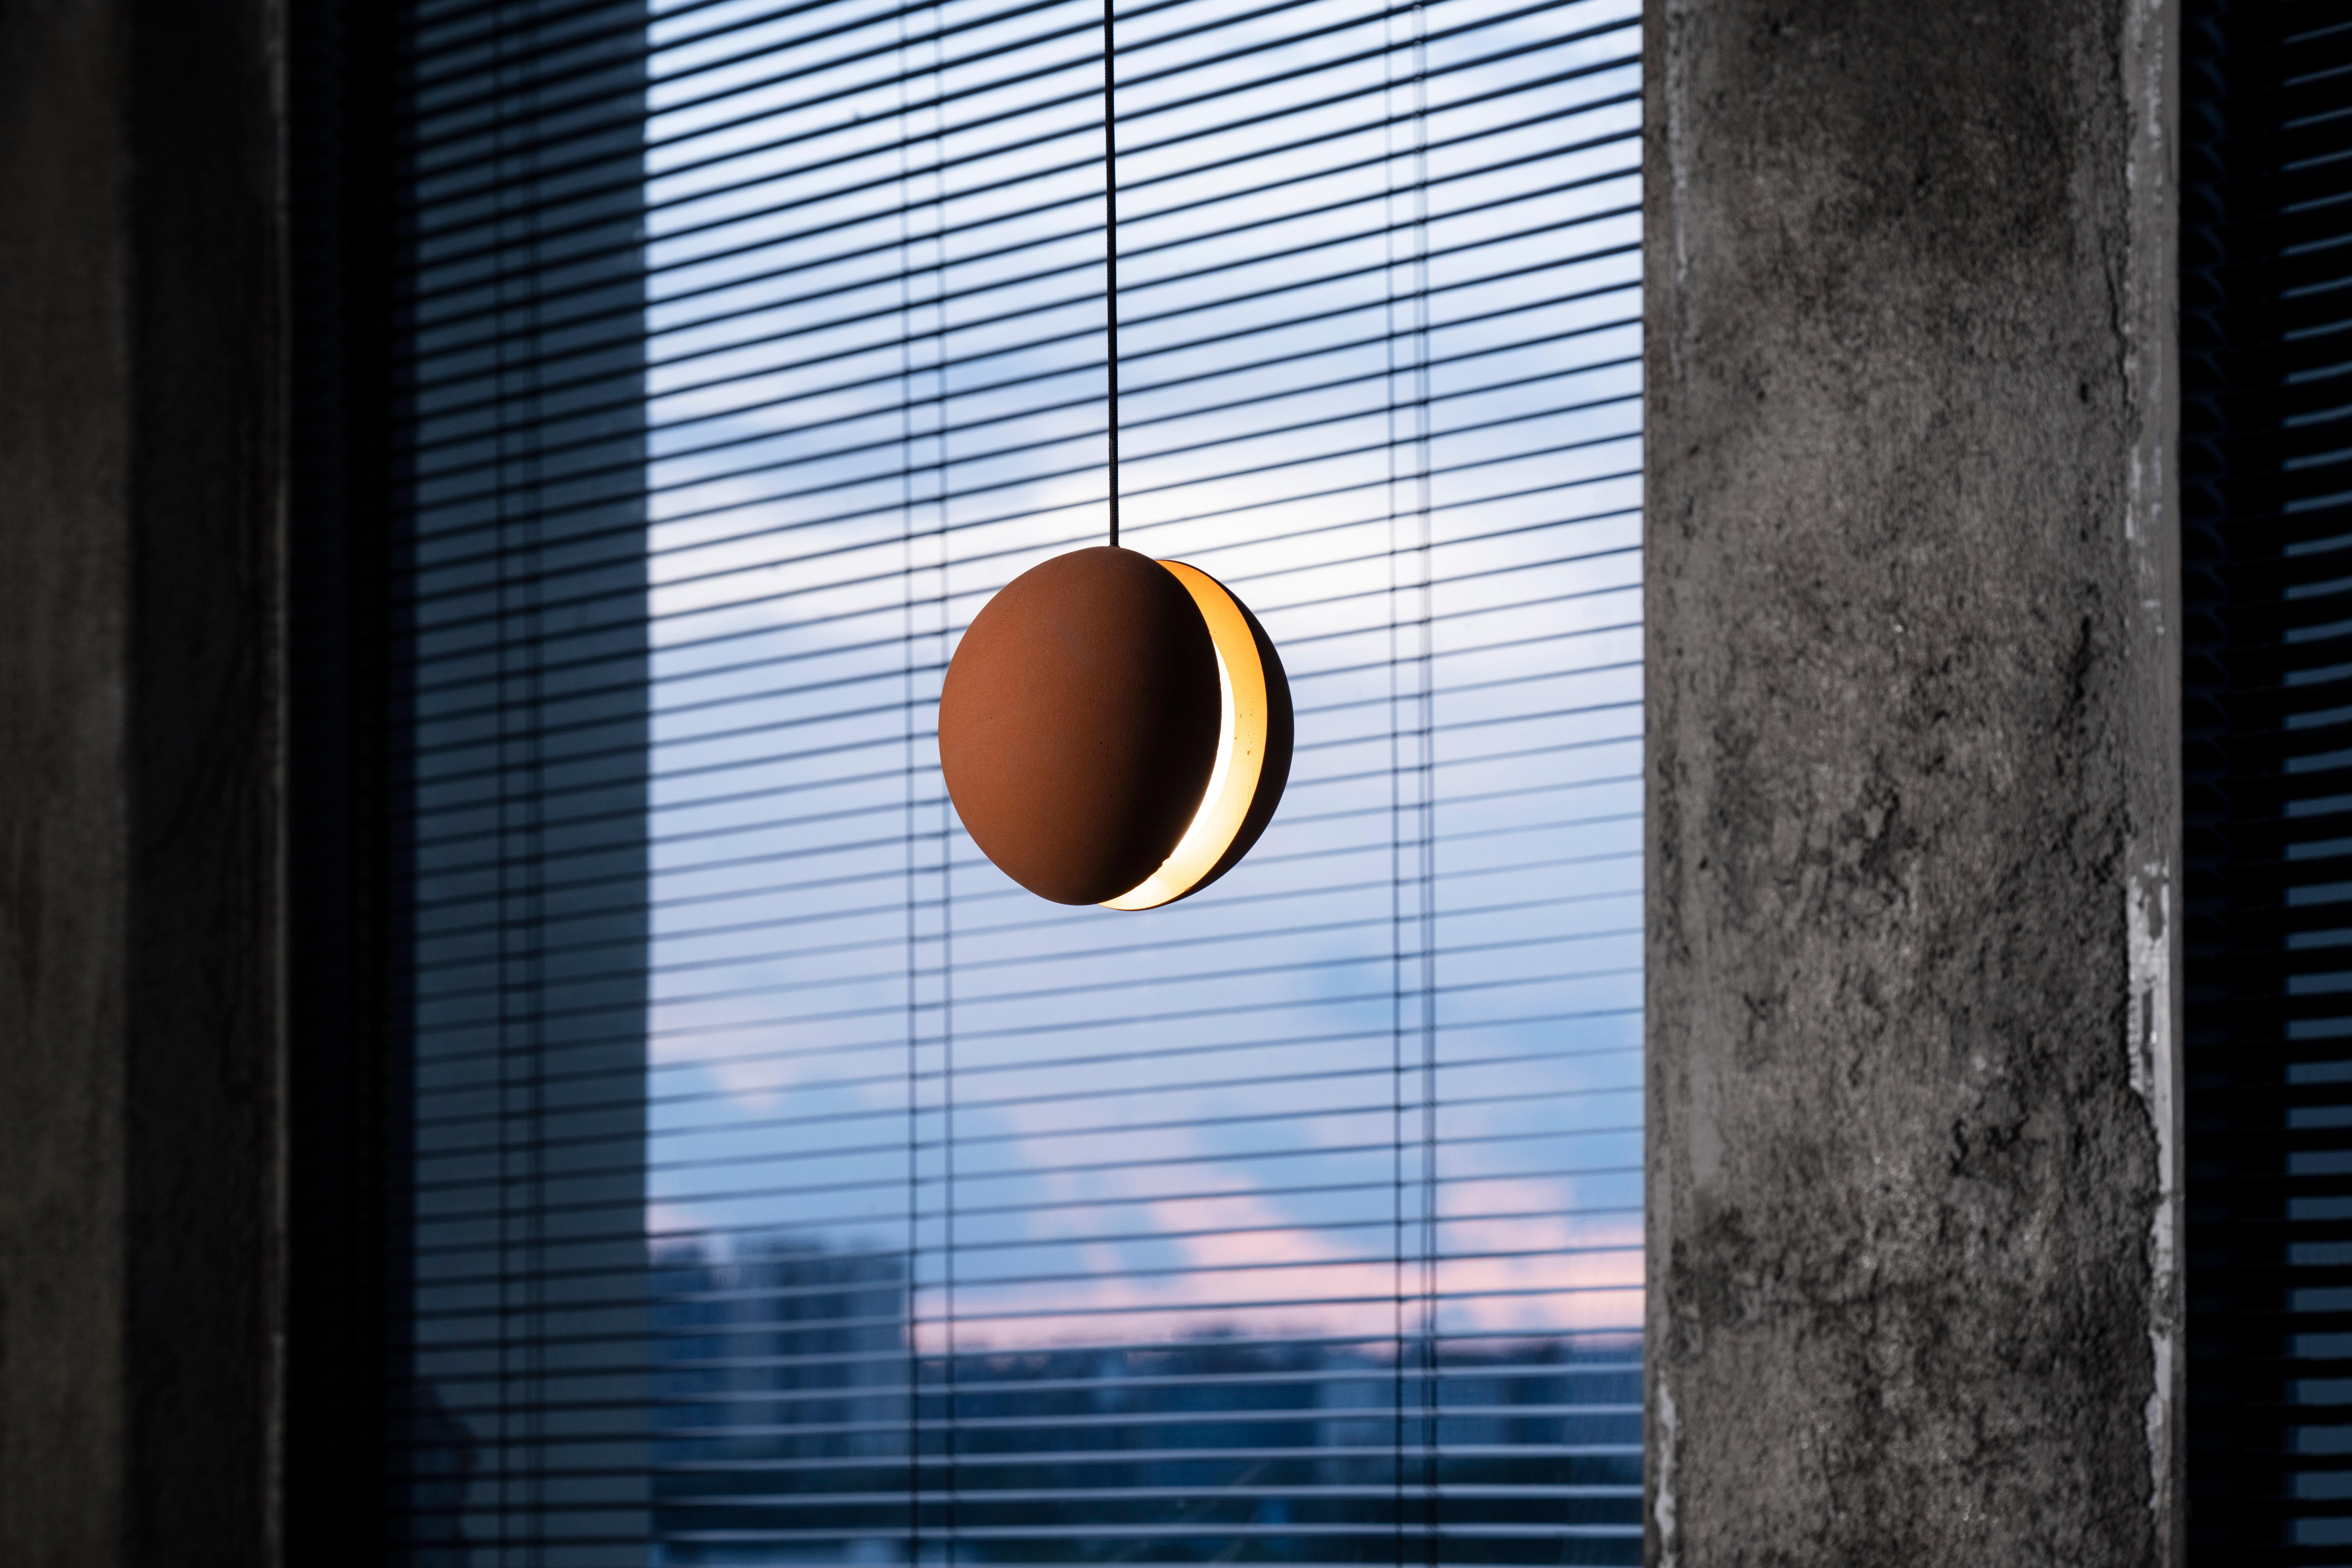 Pendant lamp 'E-mars' by Nongzao x Bentu Design.
Material: Terracotta 
Color: Earthy brown 

Measures: 12,7 cm high, 13 cm diameter
Wire: 3 meters (black)
Lamp type: AC 100-240V 50-60Hz  9W - Comptable with US electric system.

Variations:
- Color: